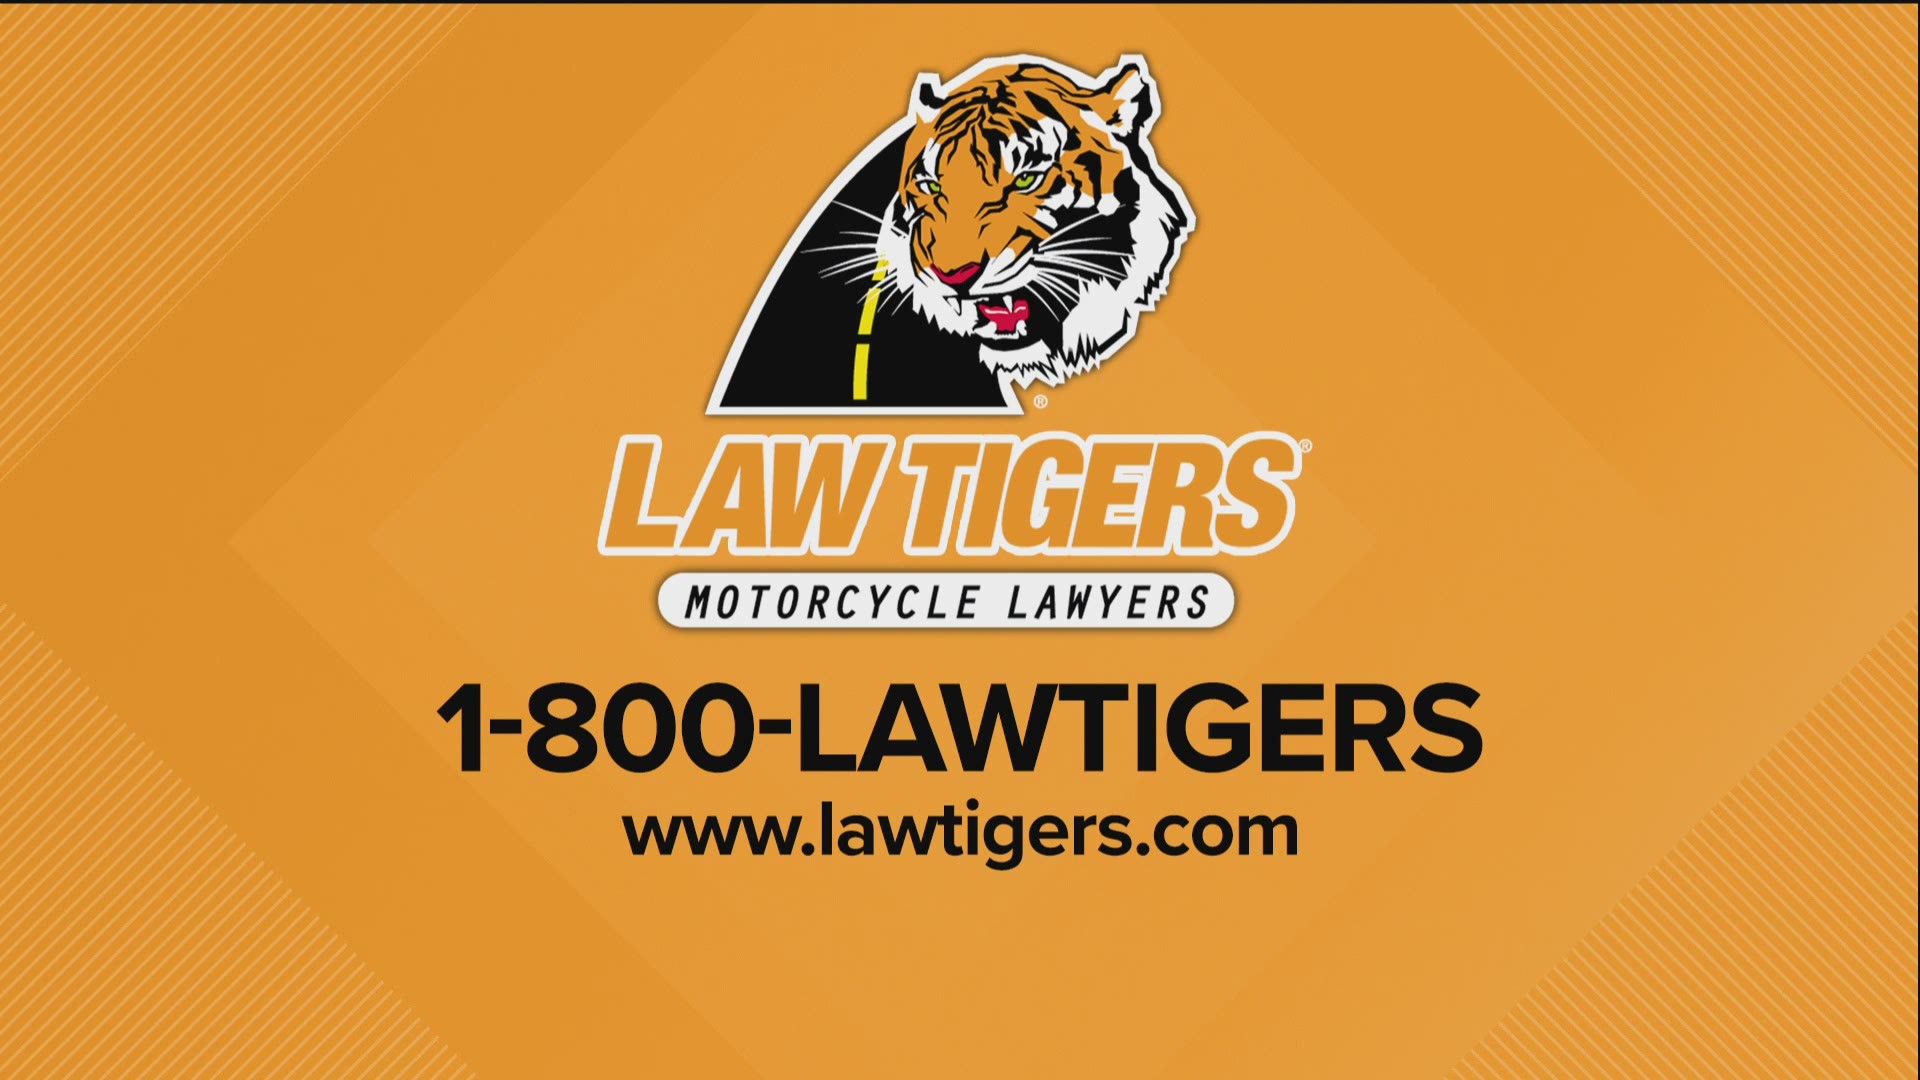 If you're ever injured in an accident, you want a tiger to have your back. Law Tigers breaks down their services.